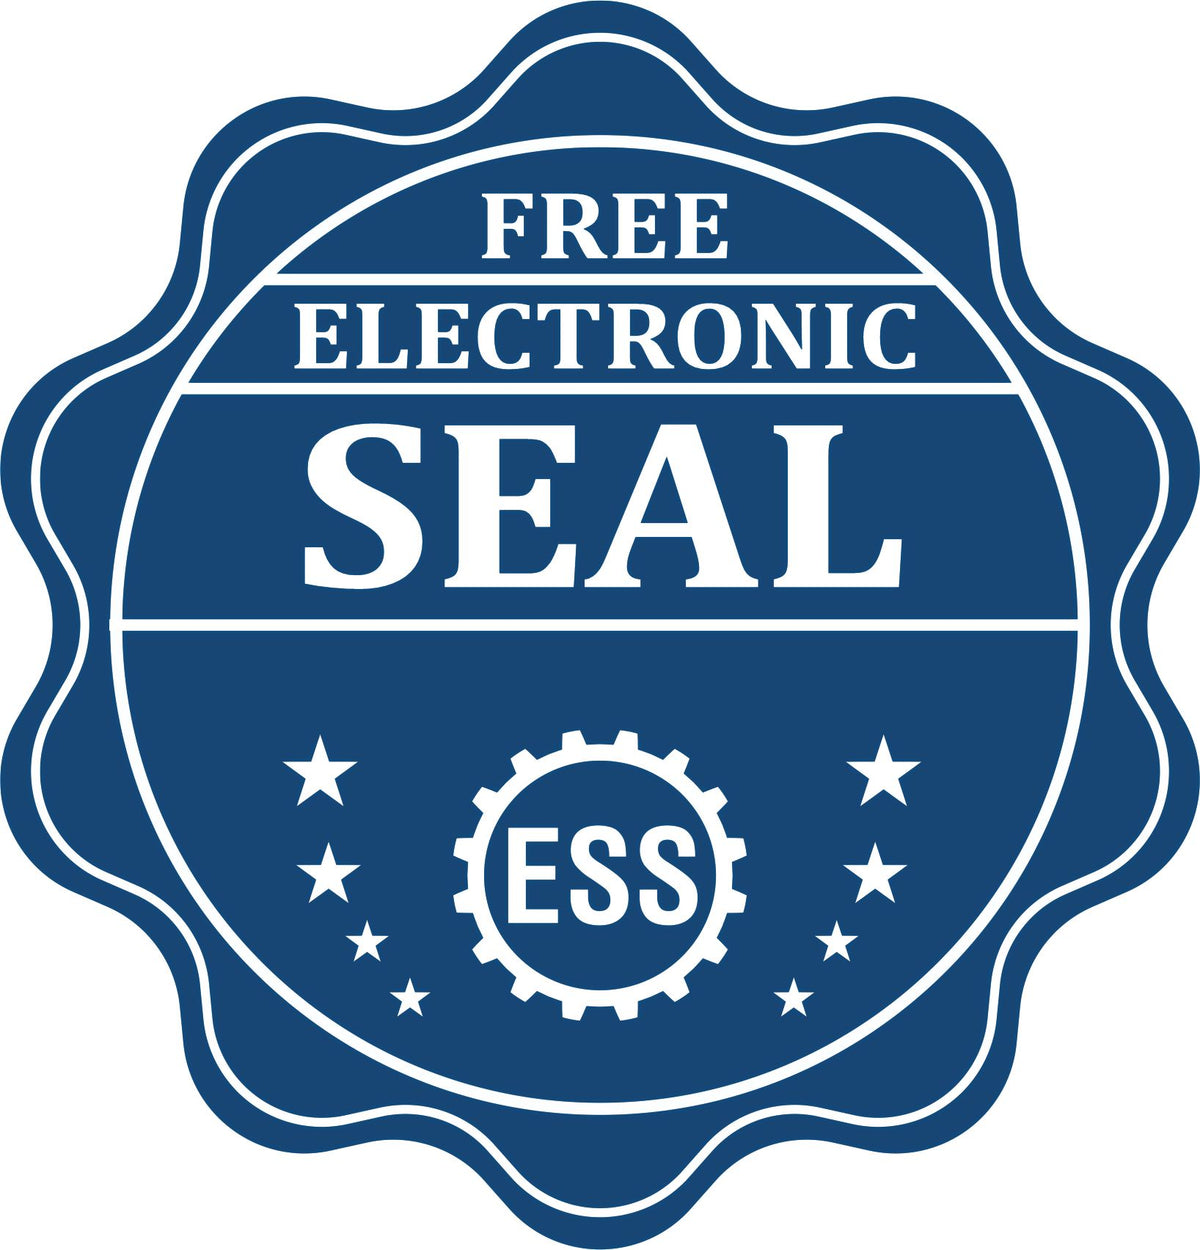 A badge showing a free electronic seal for the Handheld Minnesota Professional Engineer Embosser with stars and the ESS gear on the emblem.